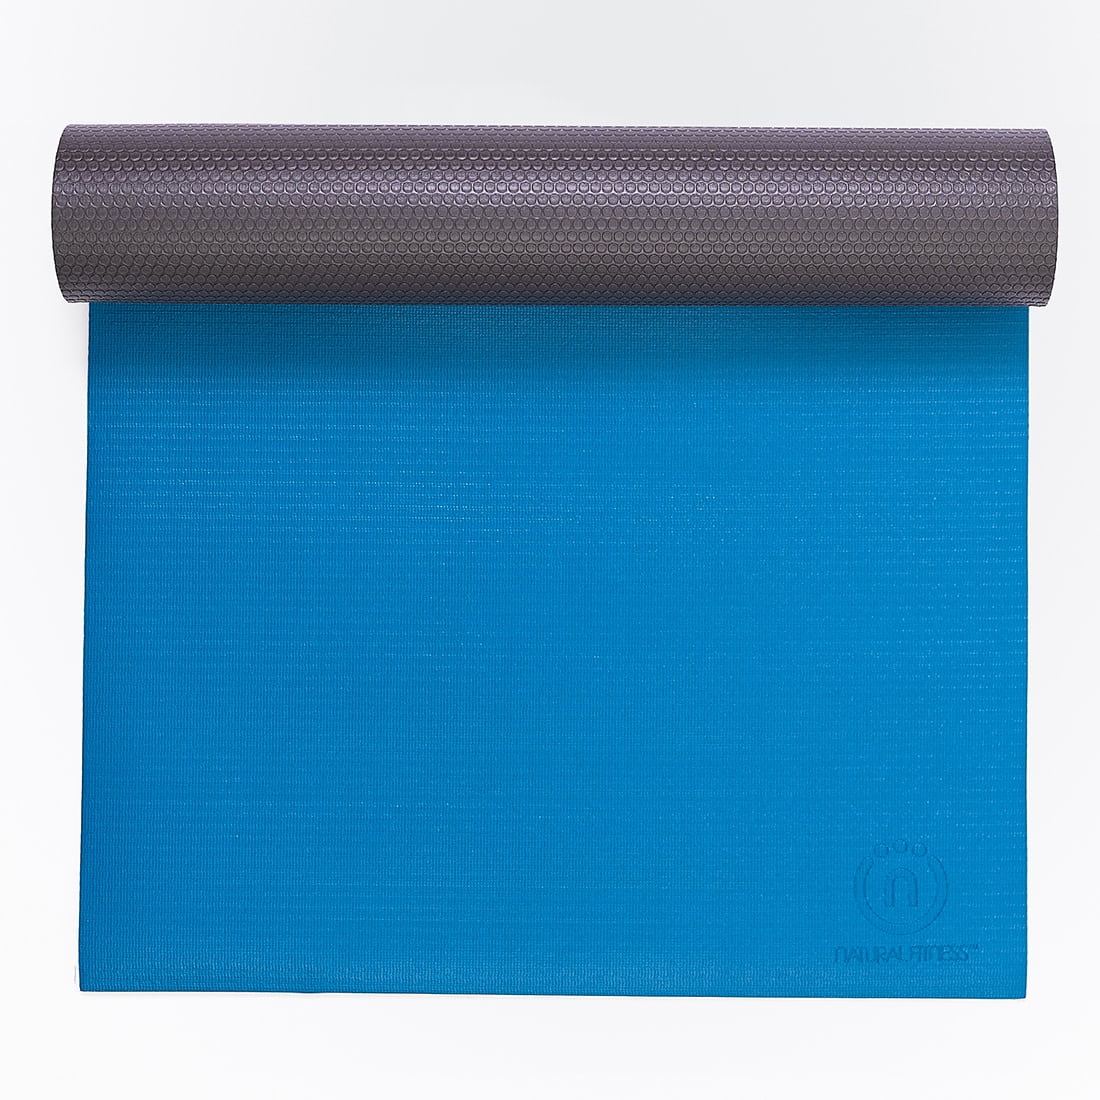 Natural Fitness 5mm Thick Warrior Yoga Mat Designed for Comfortable Support  and Studio Use 